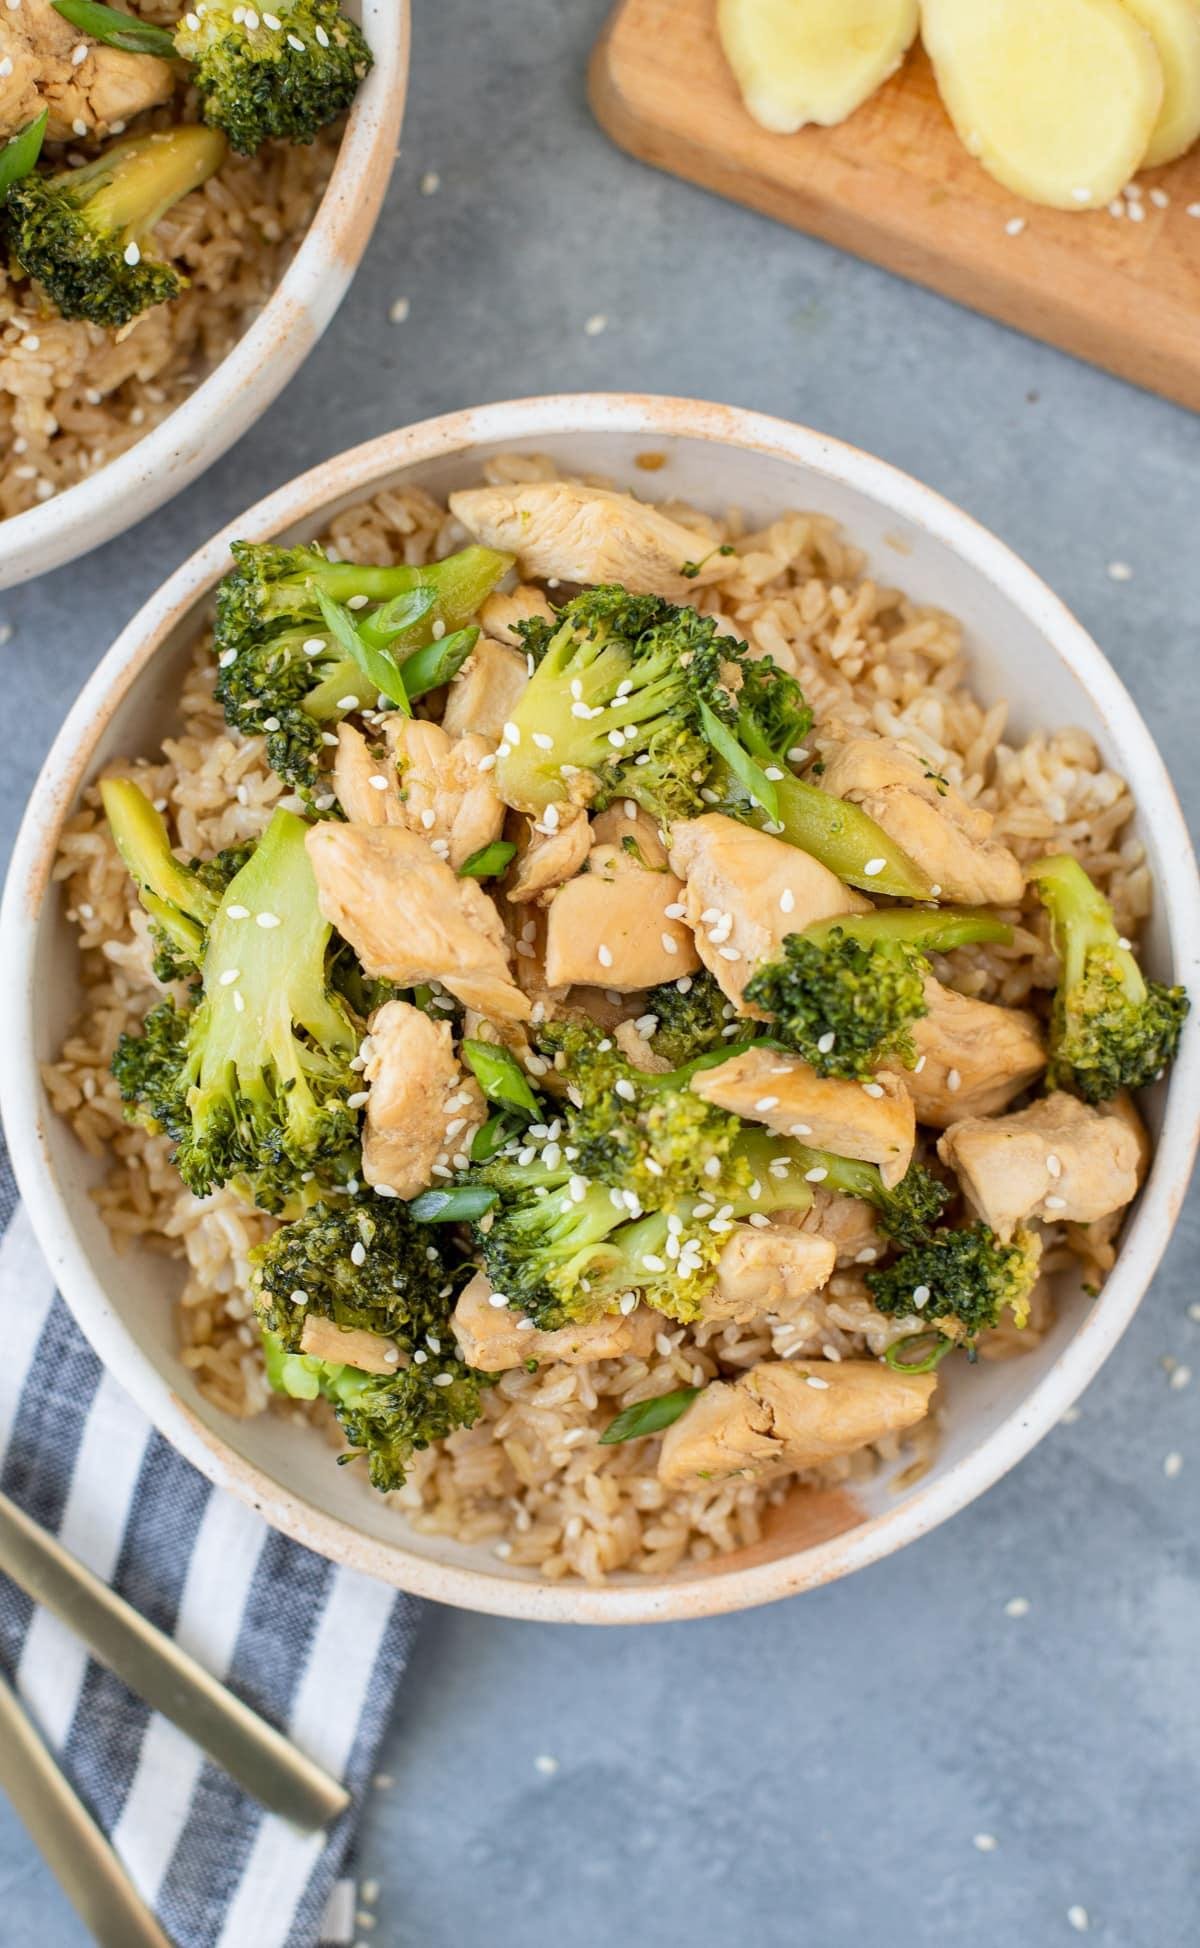 5 Flavorful Ways to Cook Chicken for a Healthy Dinner